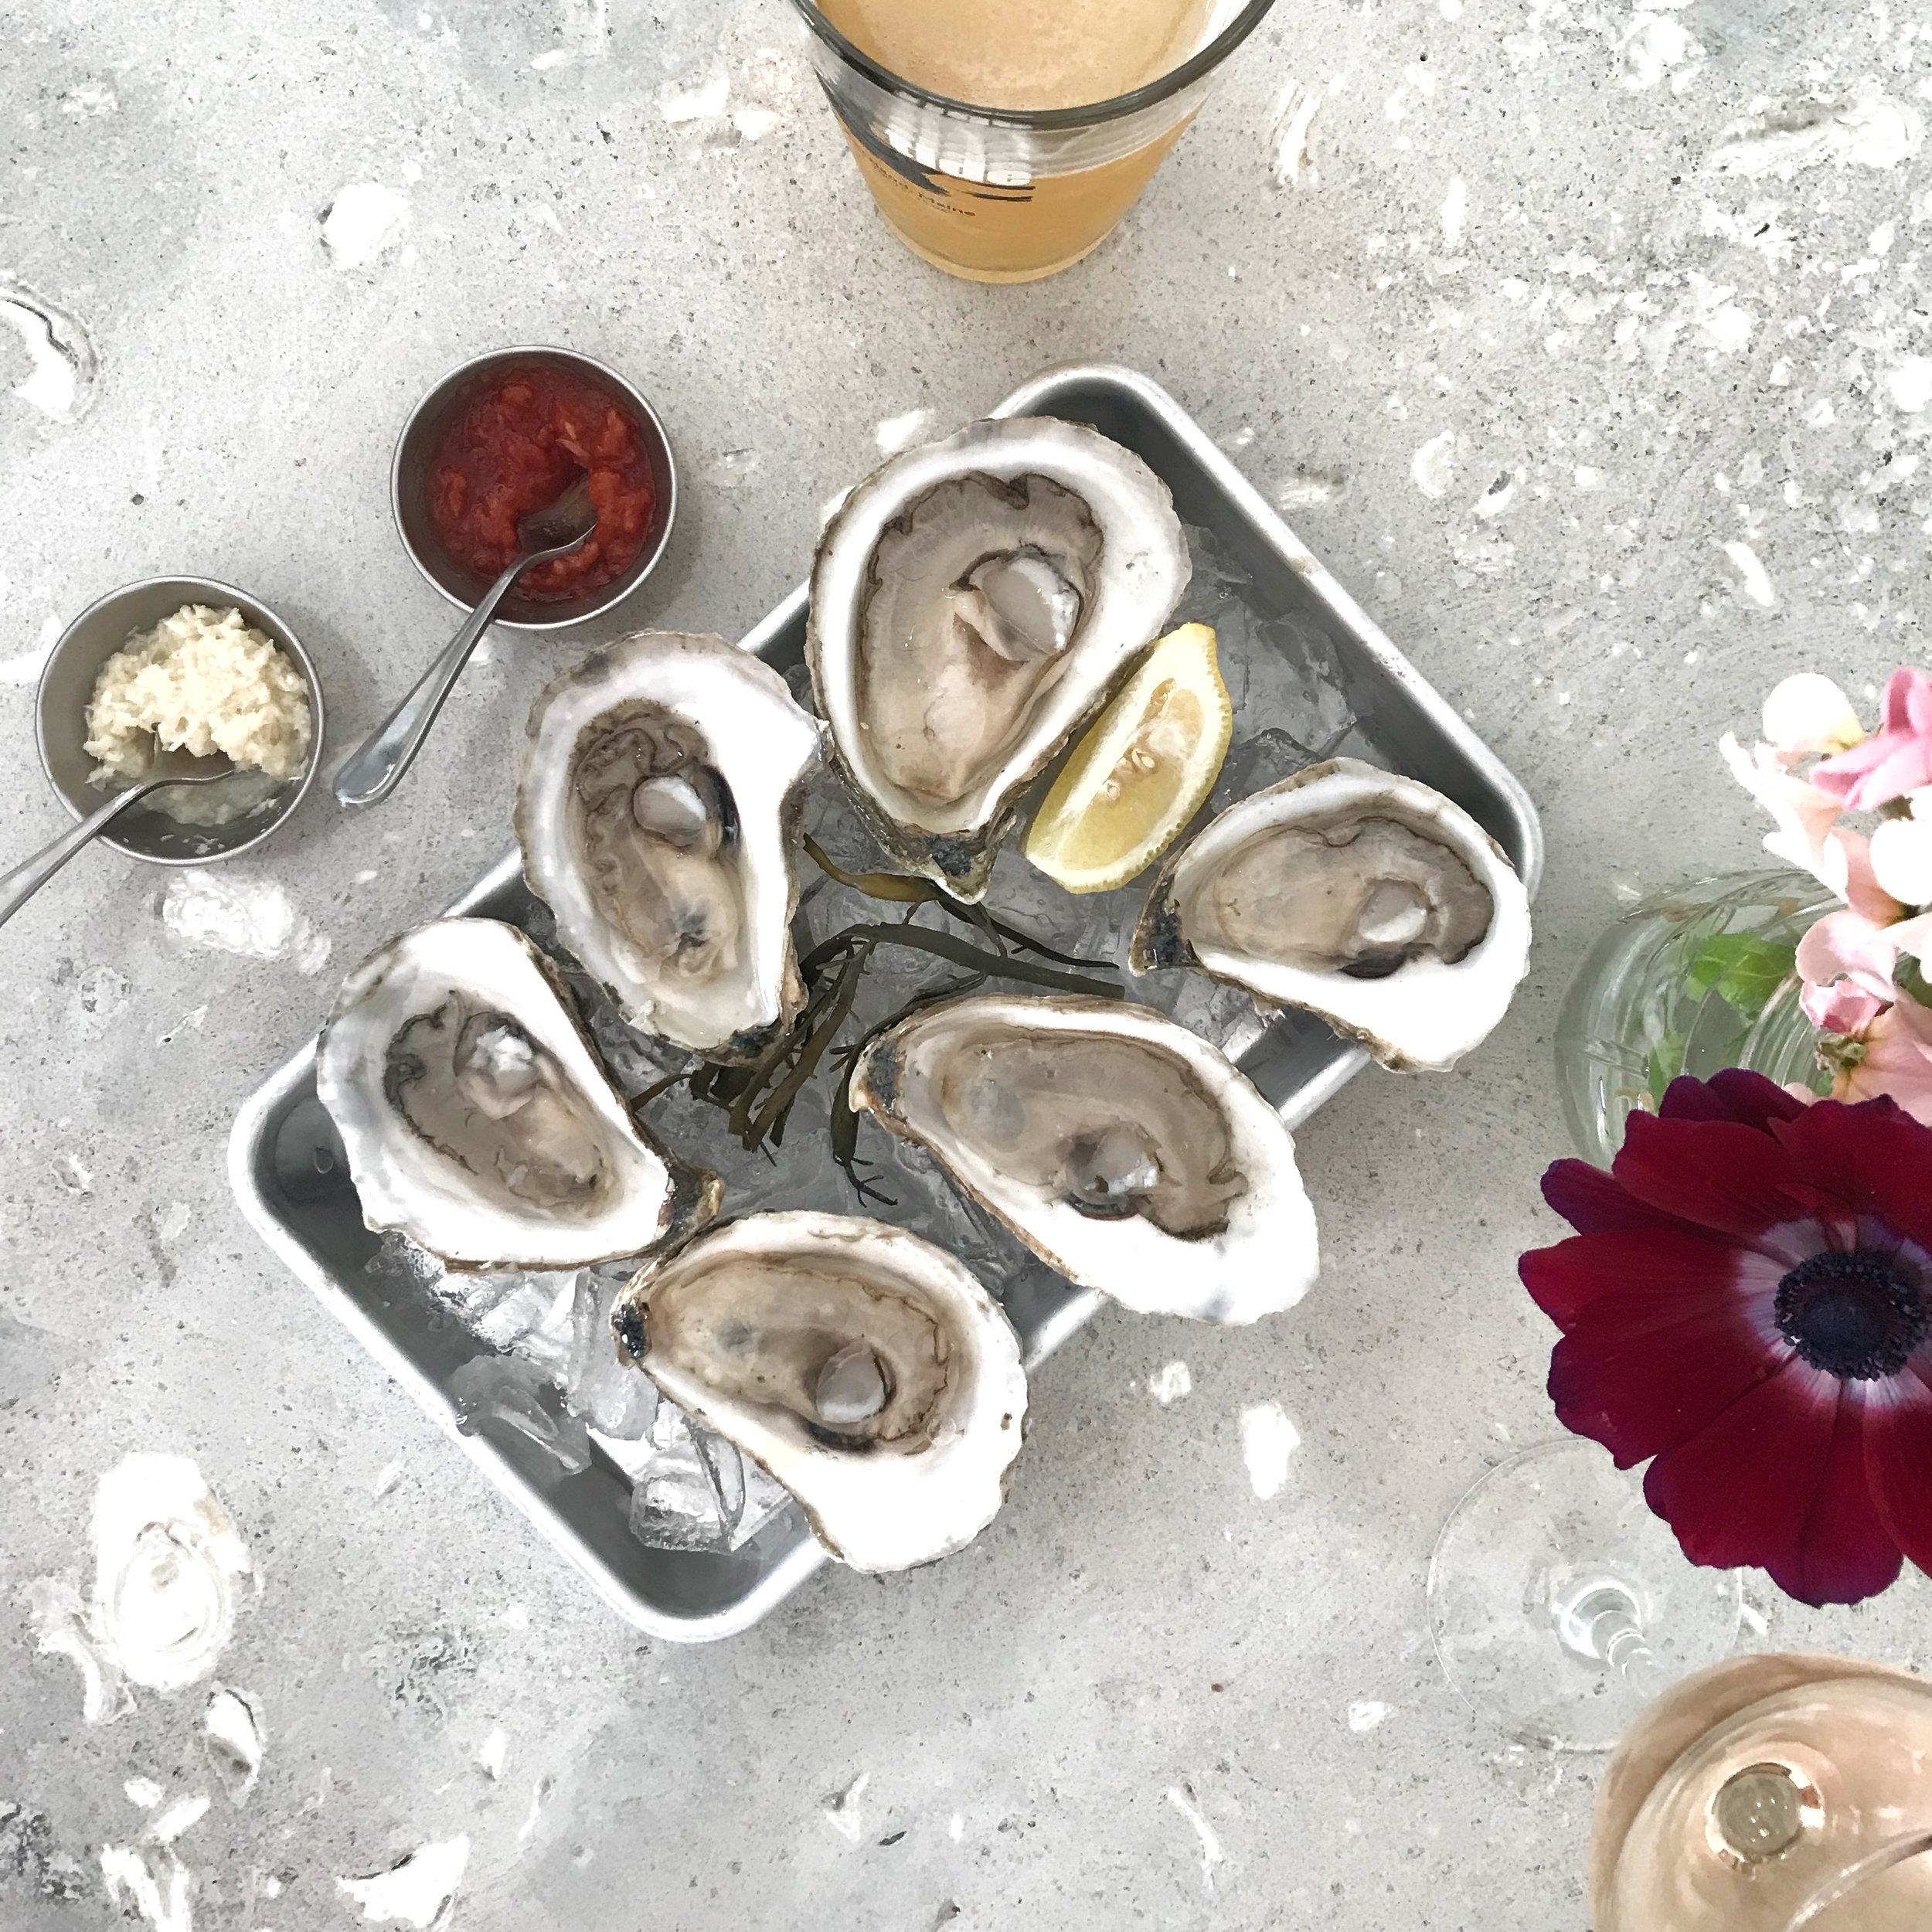 Shuck Station: An Oyster Eater's Dream Local